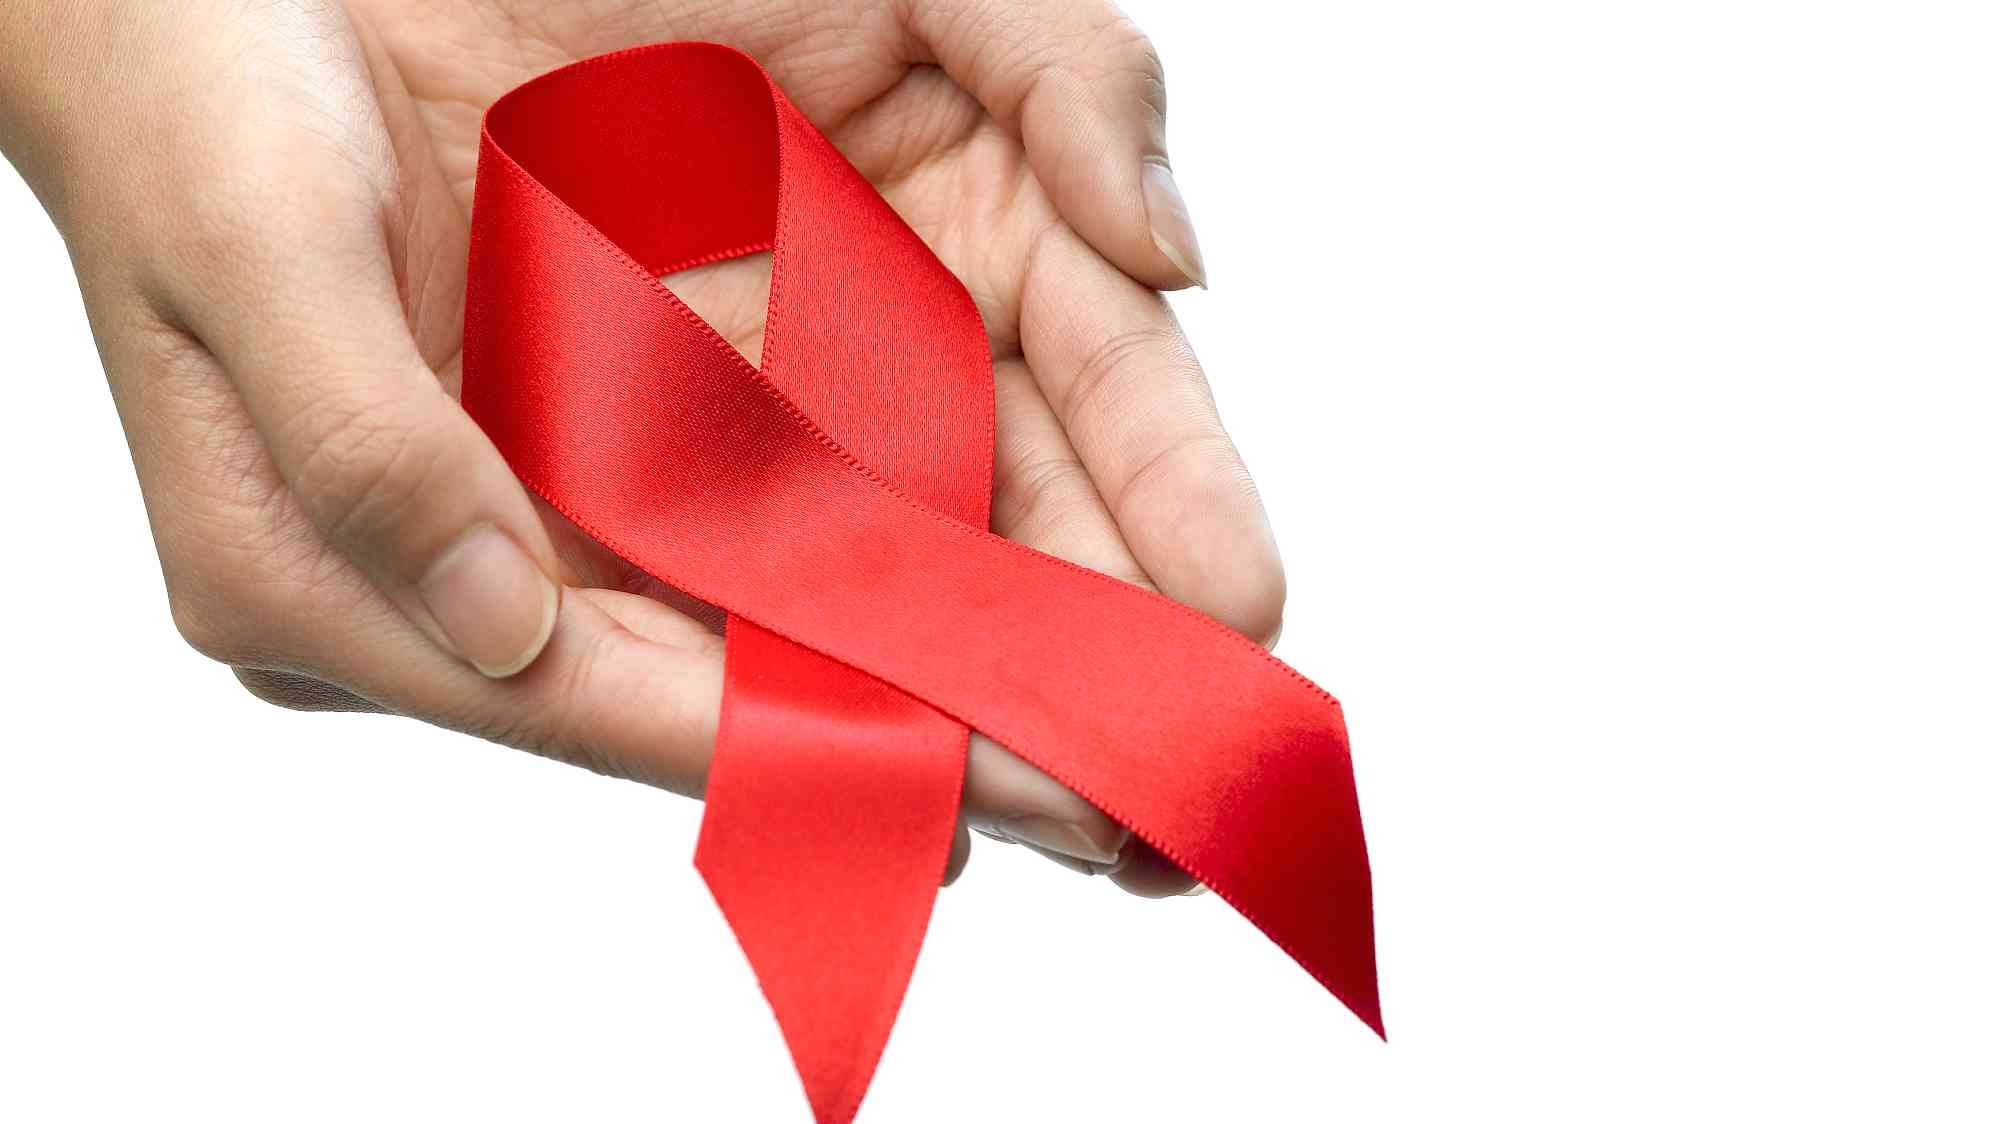 The life expectancy of people infected with human immunodeficiency virus (HIV) in Europe and the United States has been boosted by a decade since anti-AIDS drugs became available in the mid-1990s. [File photo: CGTN]